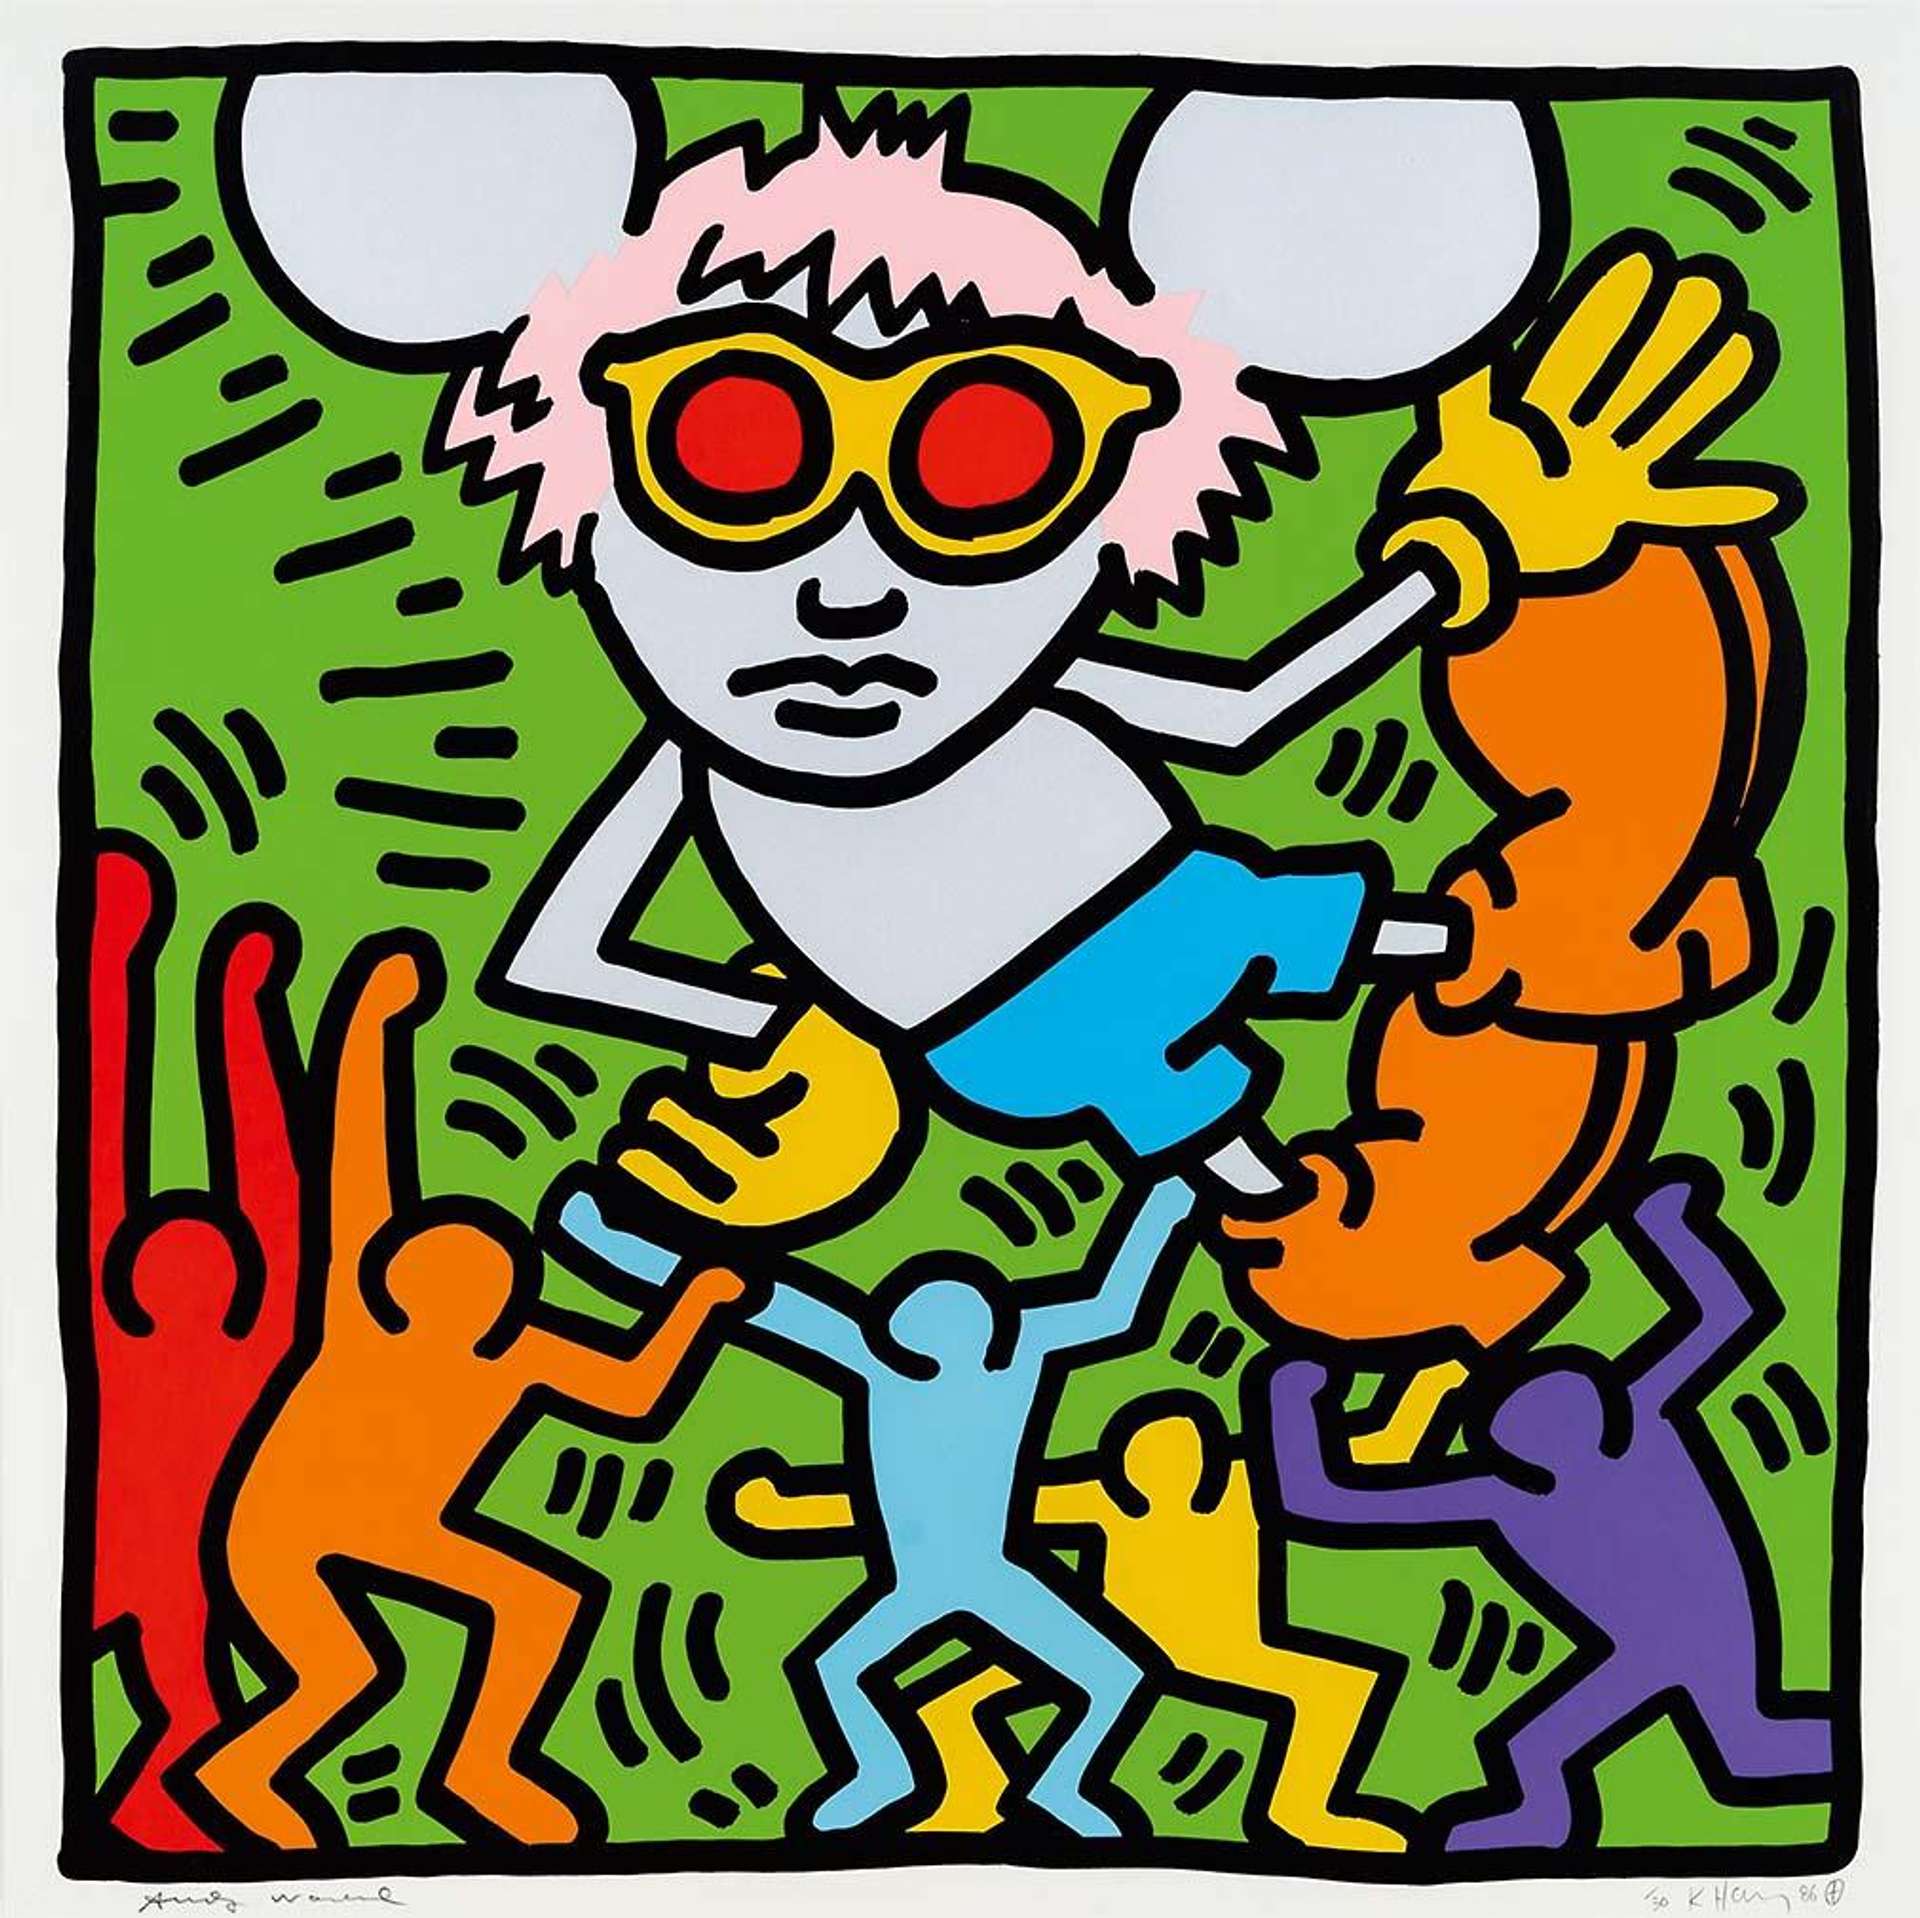 Complete with a pink spiky wig and red glasses, this tribute to Warhol is characteristic of Haring’s playful sense of humour. Here he depicts the father of Pop Art as a Mickey Mouse figure held aloft by a group of his signature dancing figures, all emitting energy lines of joy while Warhol remains inscrutable.